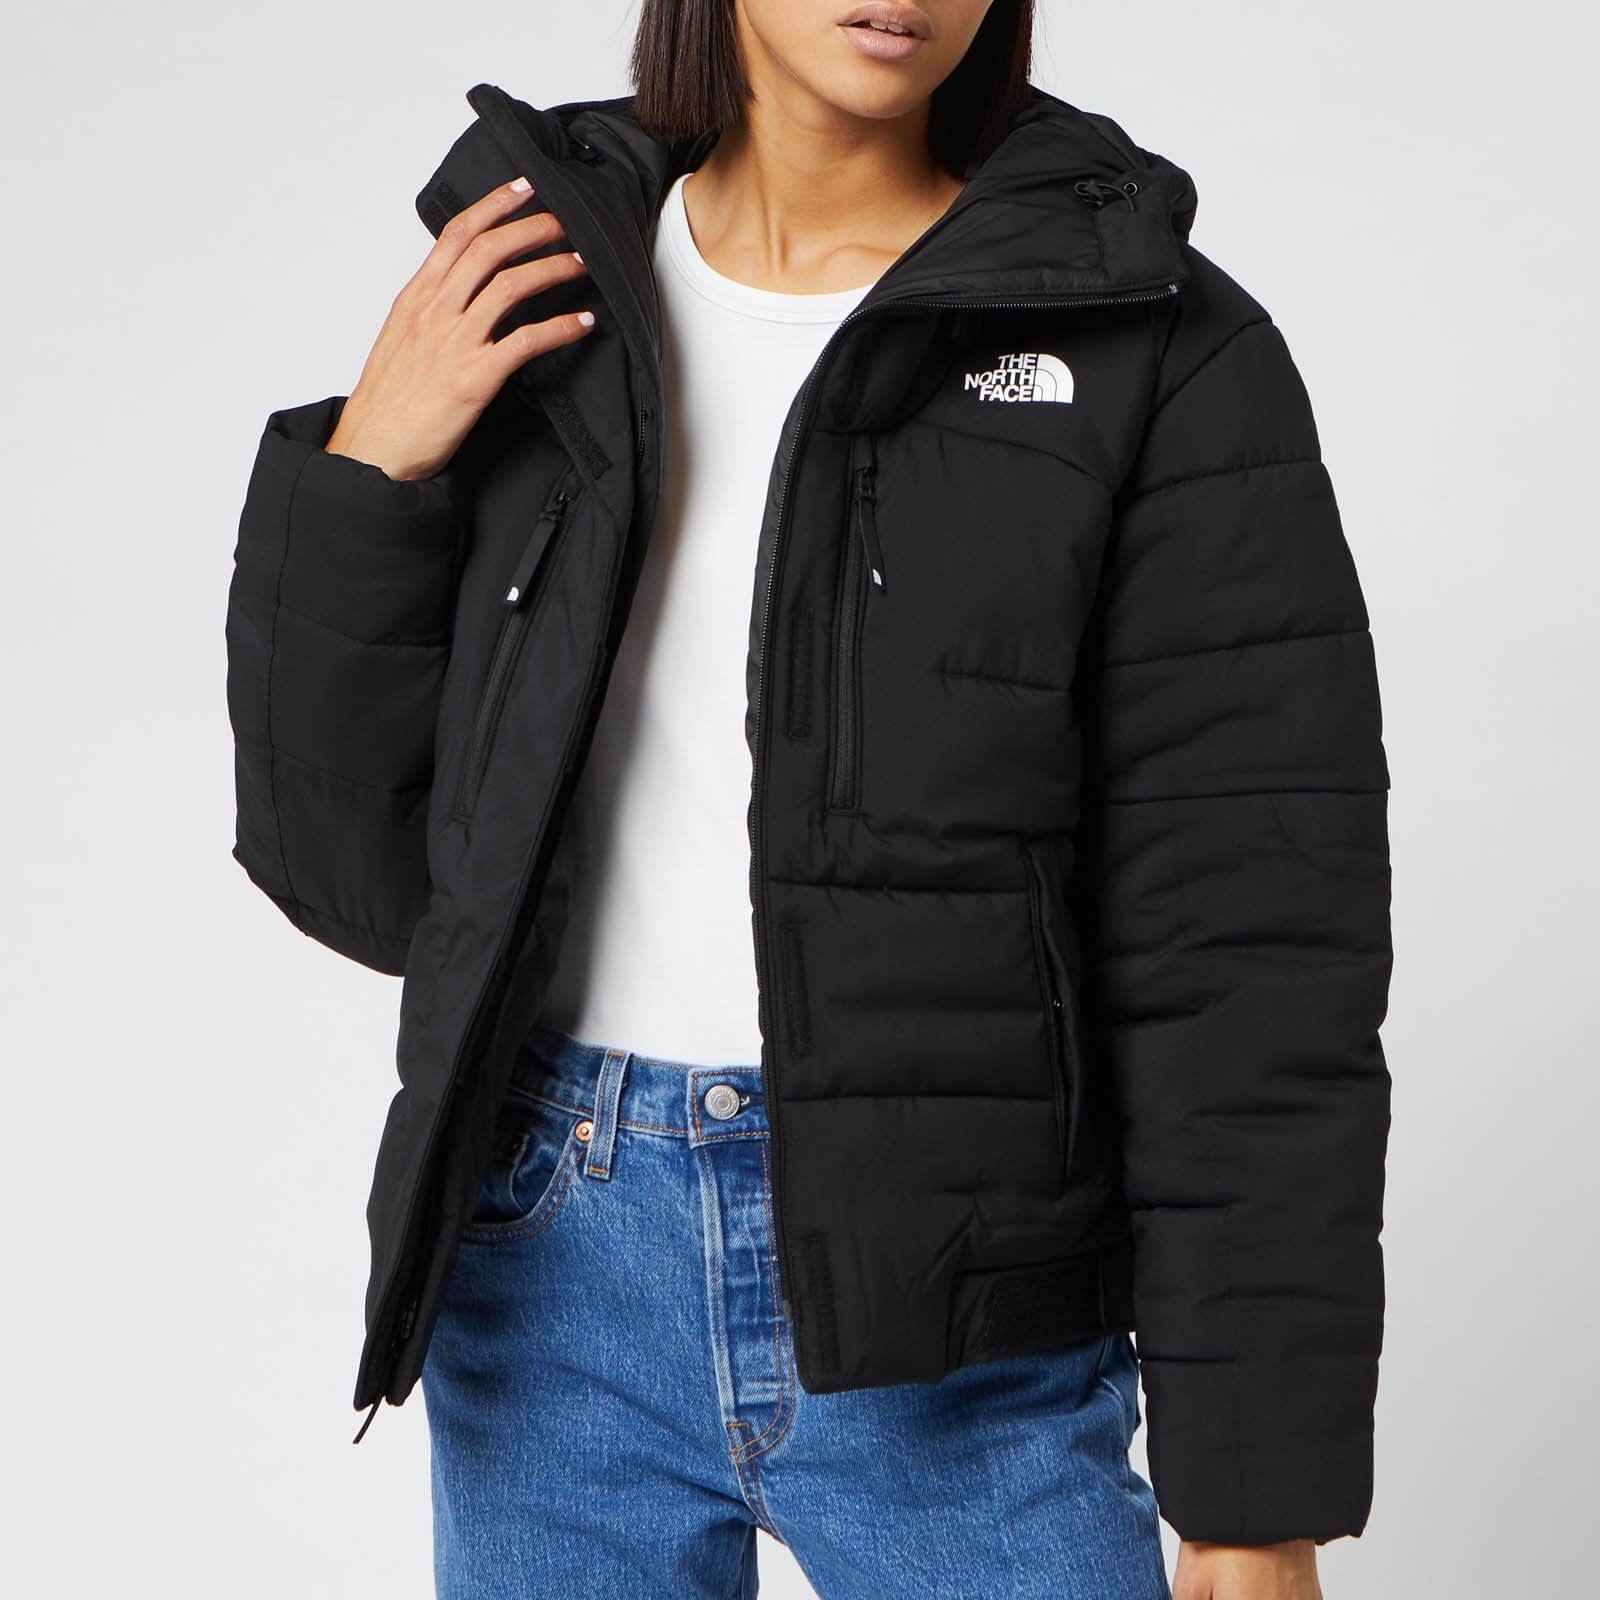 north face jacket puffer womens